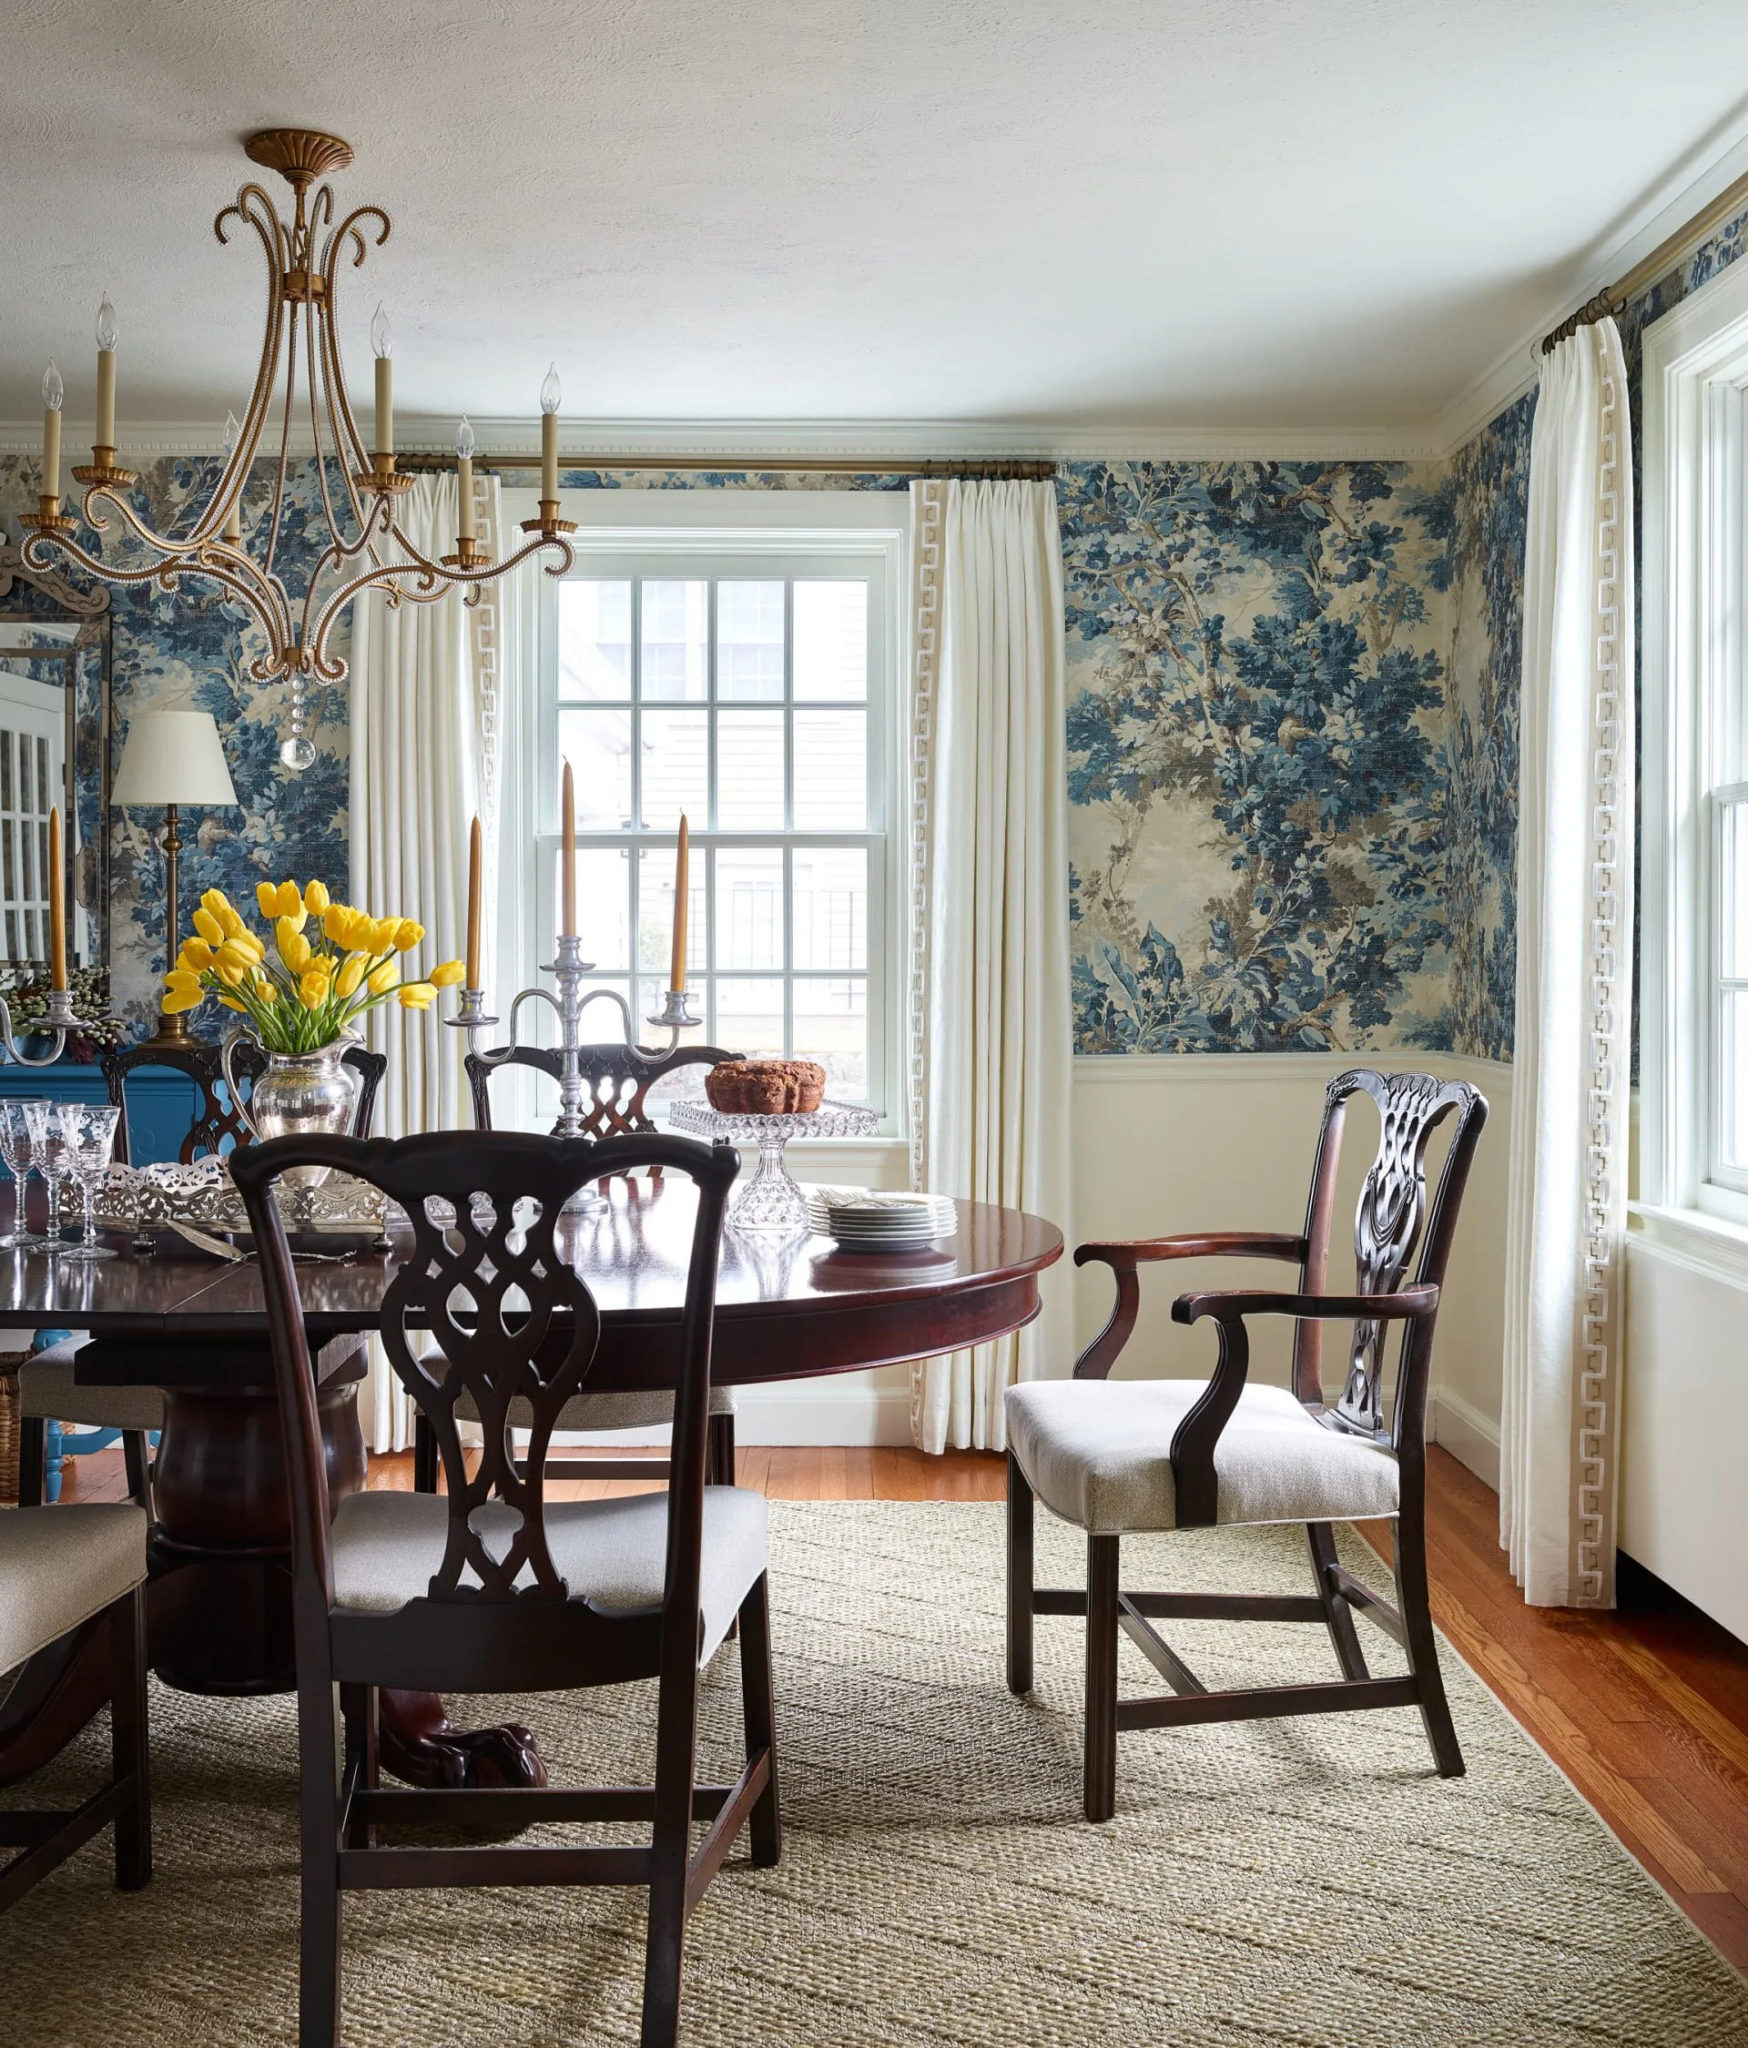 How Wallpaper Can Dramatically Change a Space